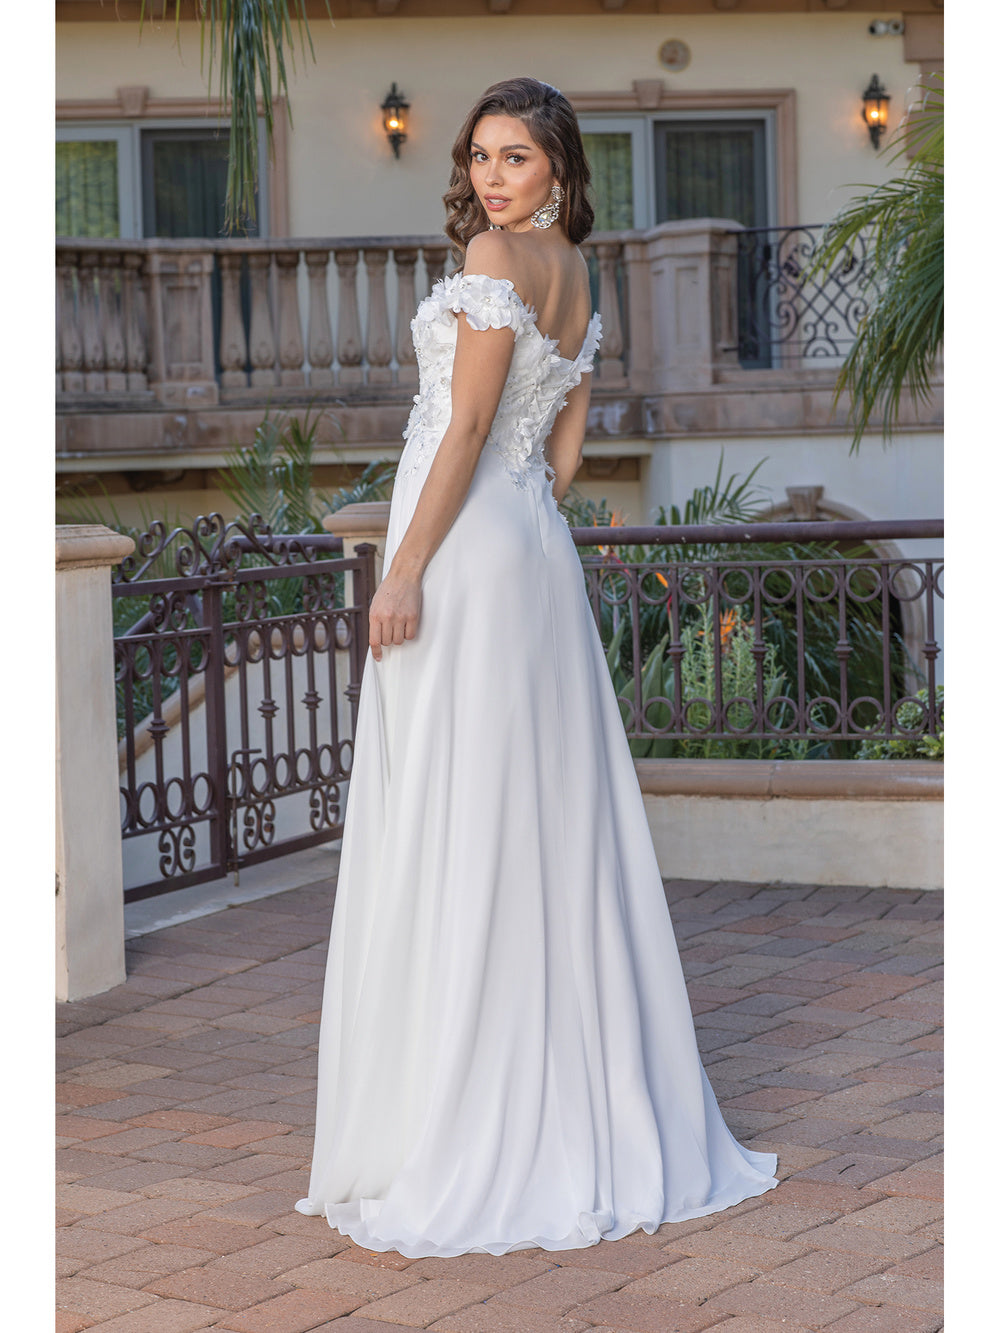 Look beautiful on your special day wearing this Elegant Off White Maxi Slit Off the Shoulder Corset A Line Wedding Dress. The dress features 3d lace applique bodice to give you a glamorous look. Look your best and show up the aisle with confidence. Great destination wedding dress. lace up corset back.  Sizes: XS-3XL  (XS=size 4   -  3XL=size 16)  Colors: Off White